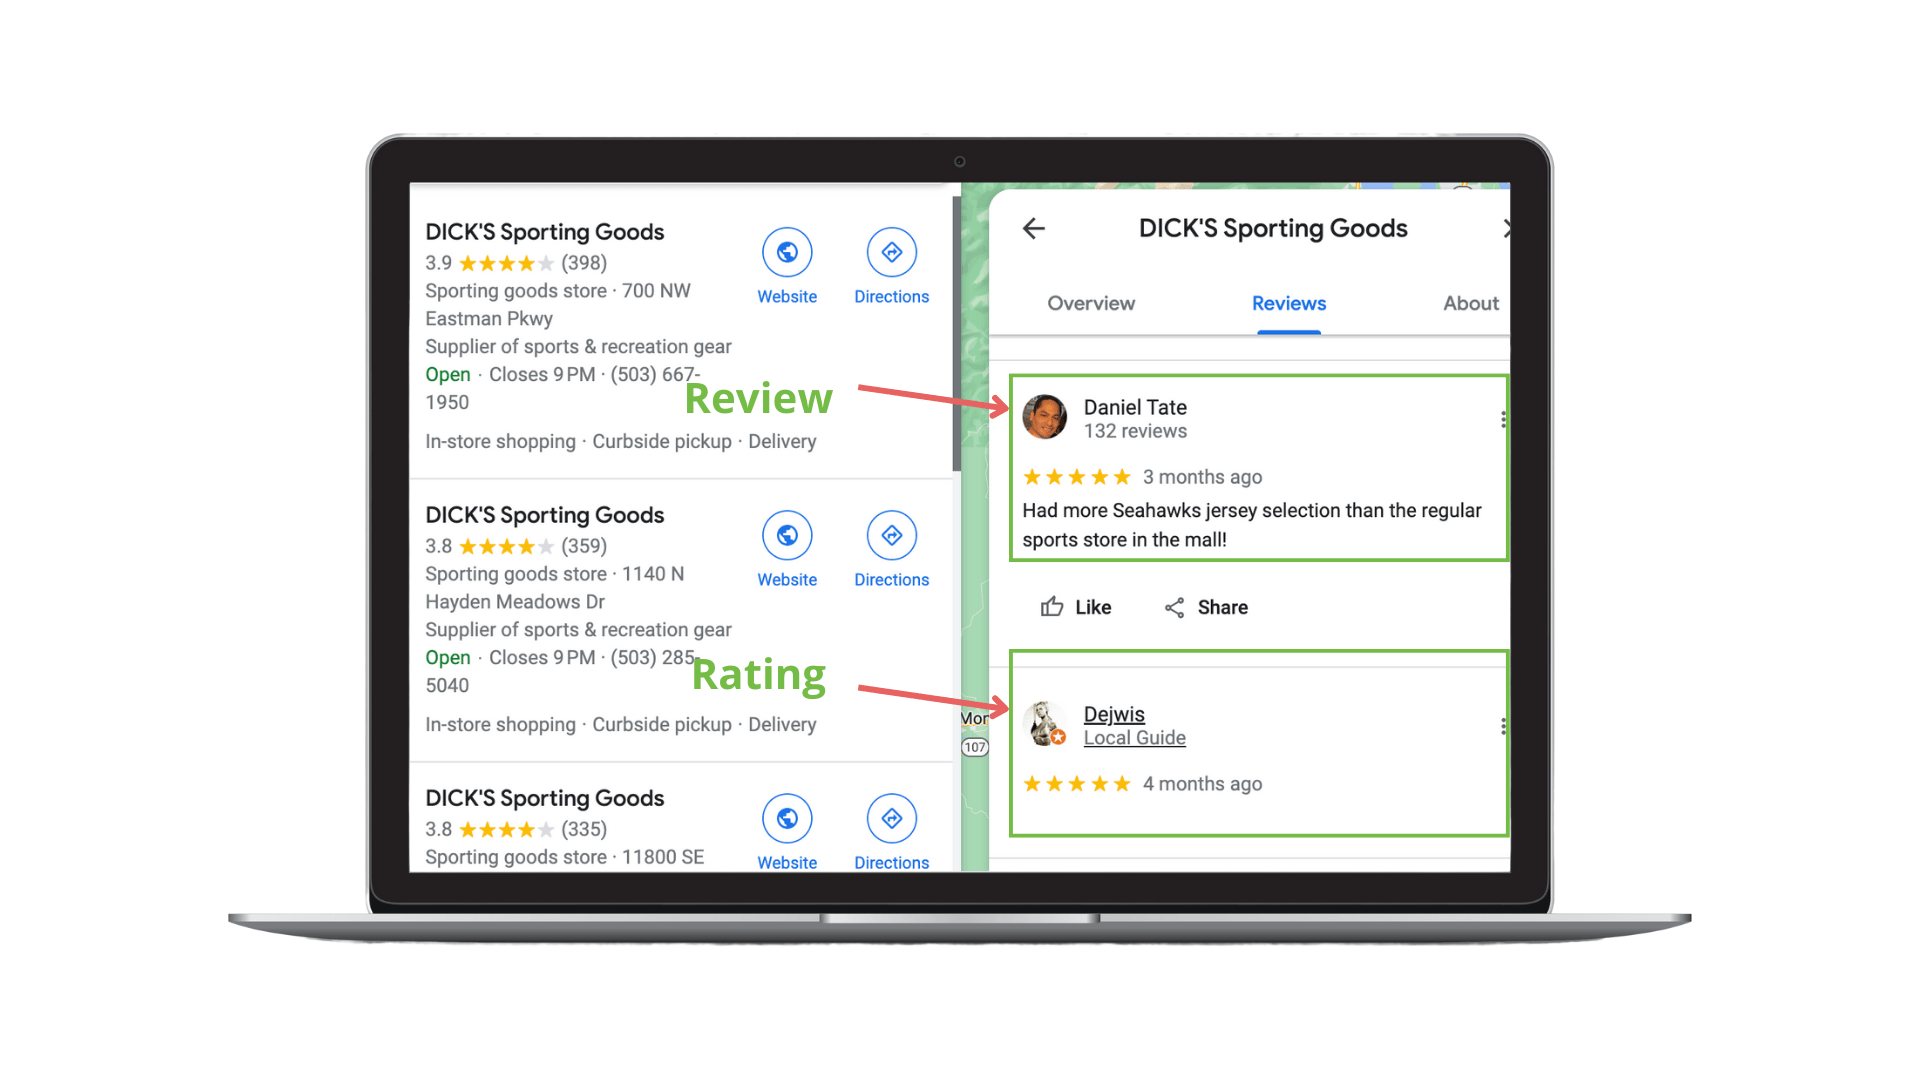 Google Ratings and Reviews Example on DICK's Sporting Goods GBP, Laptop Overlay